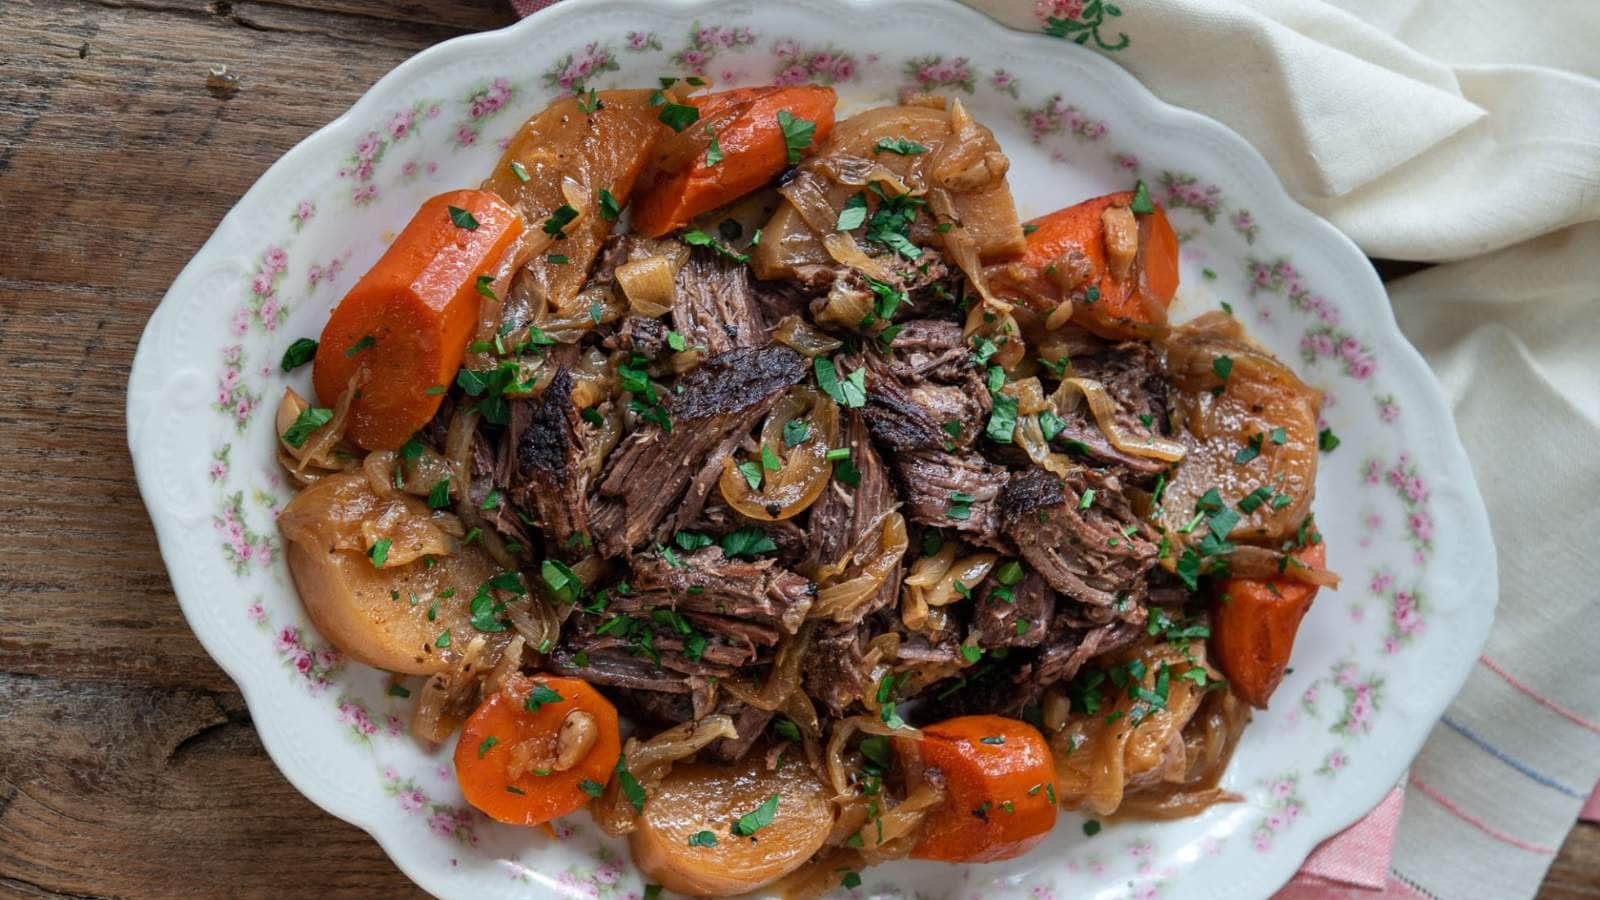 Spiced Beef Pot Roast recipe by Beyond Kimchee.